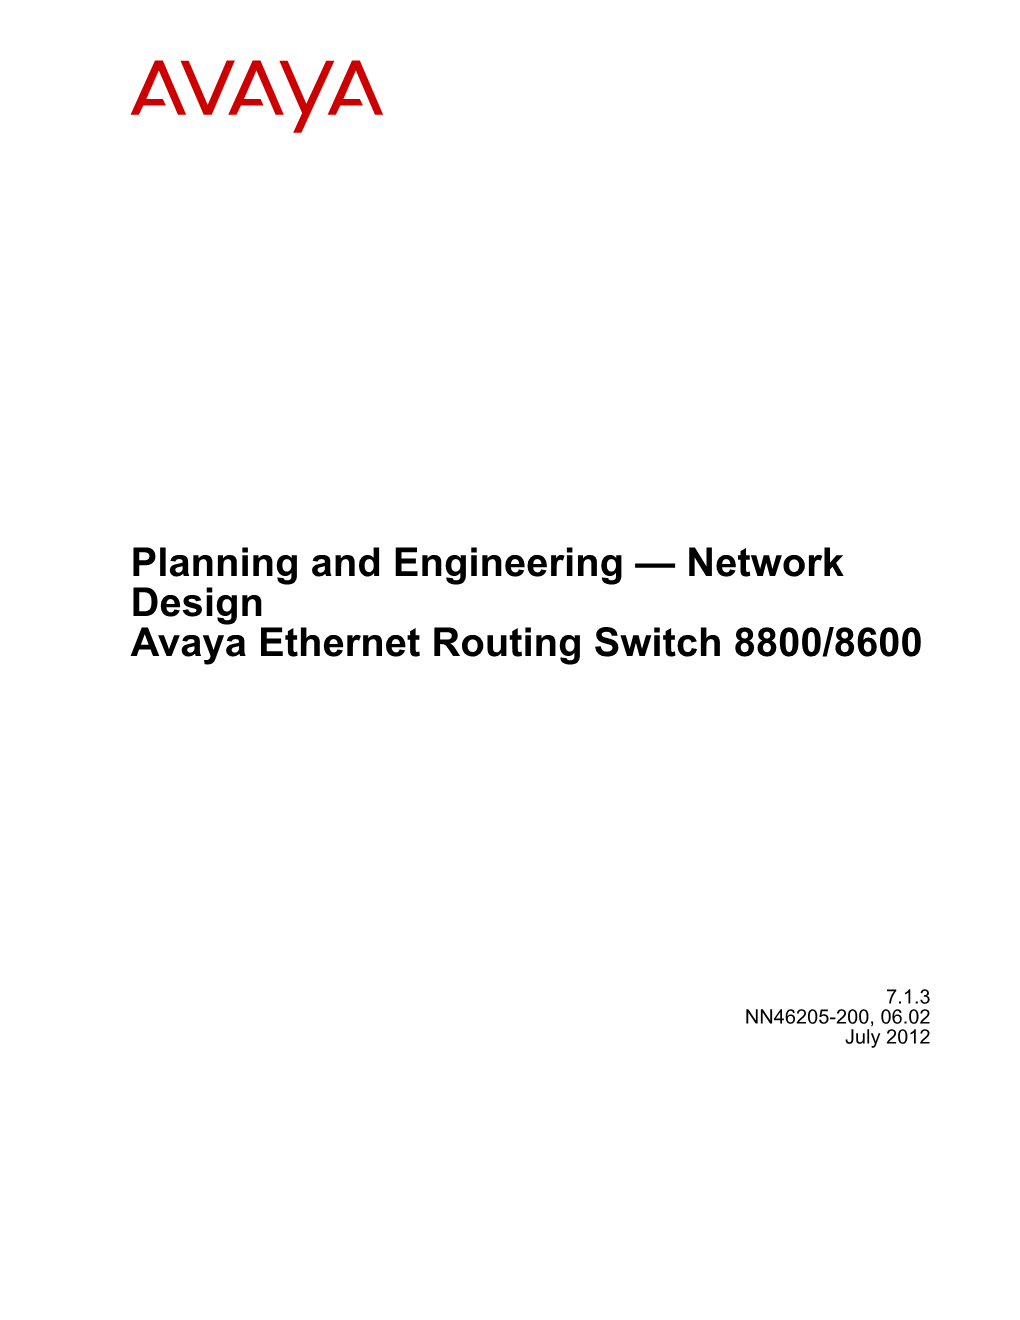 Planning and Engineering — Network Design Avaya Ethernet Routing Switch 8800/8600